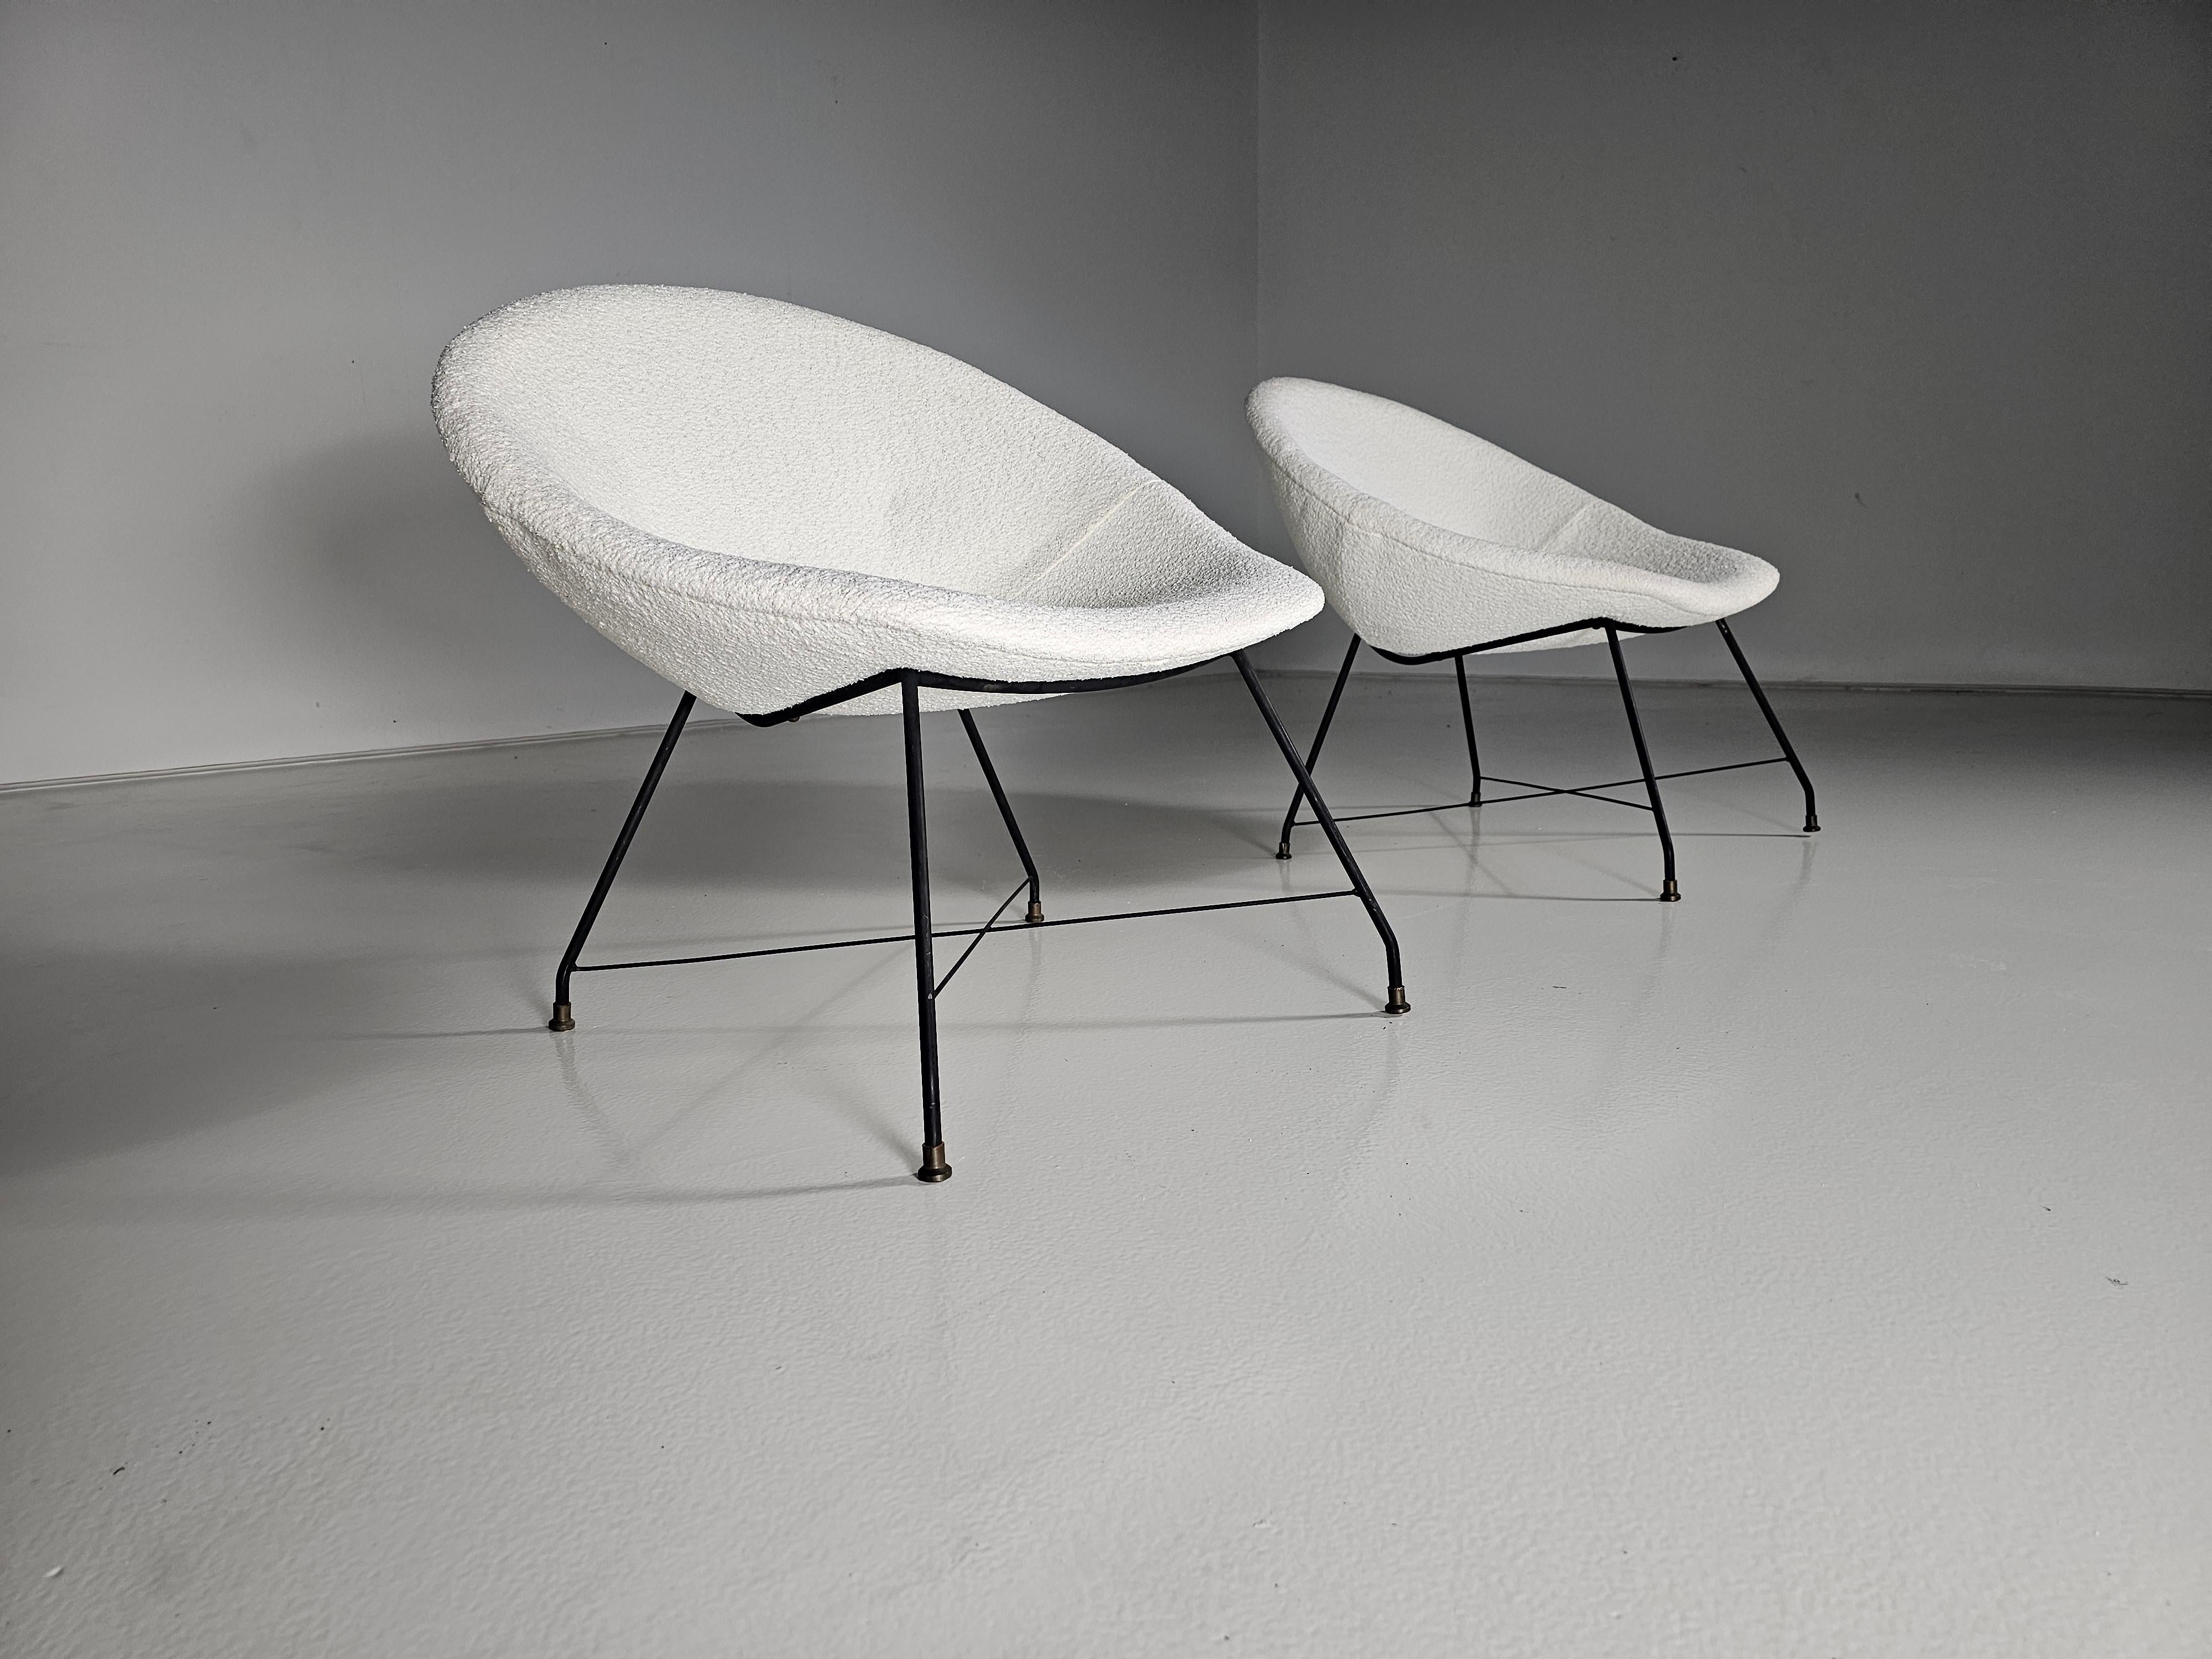 ‘Minoletta’ Lounge Chairs by Augusto Bozzi for Saporiti, 1950s For Sale 1